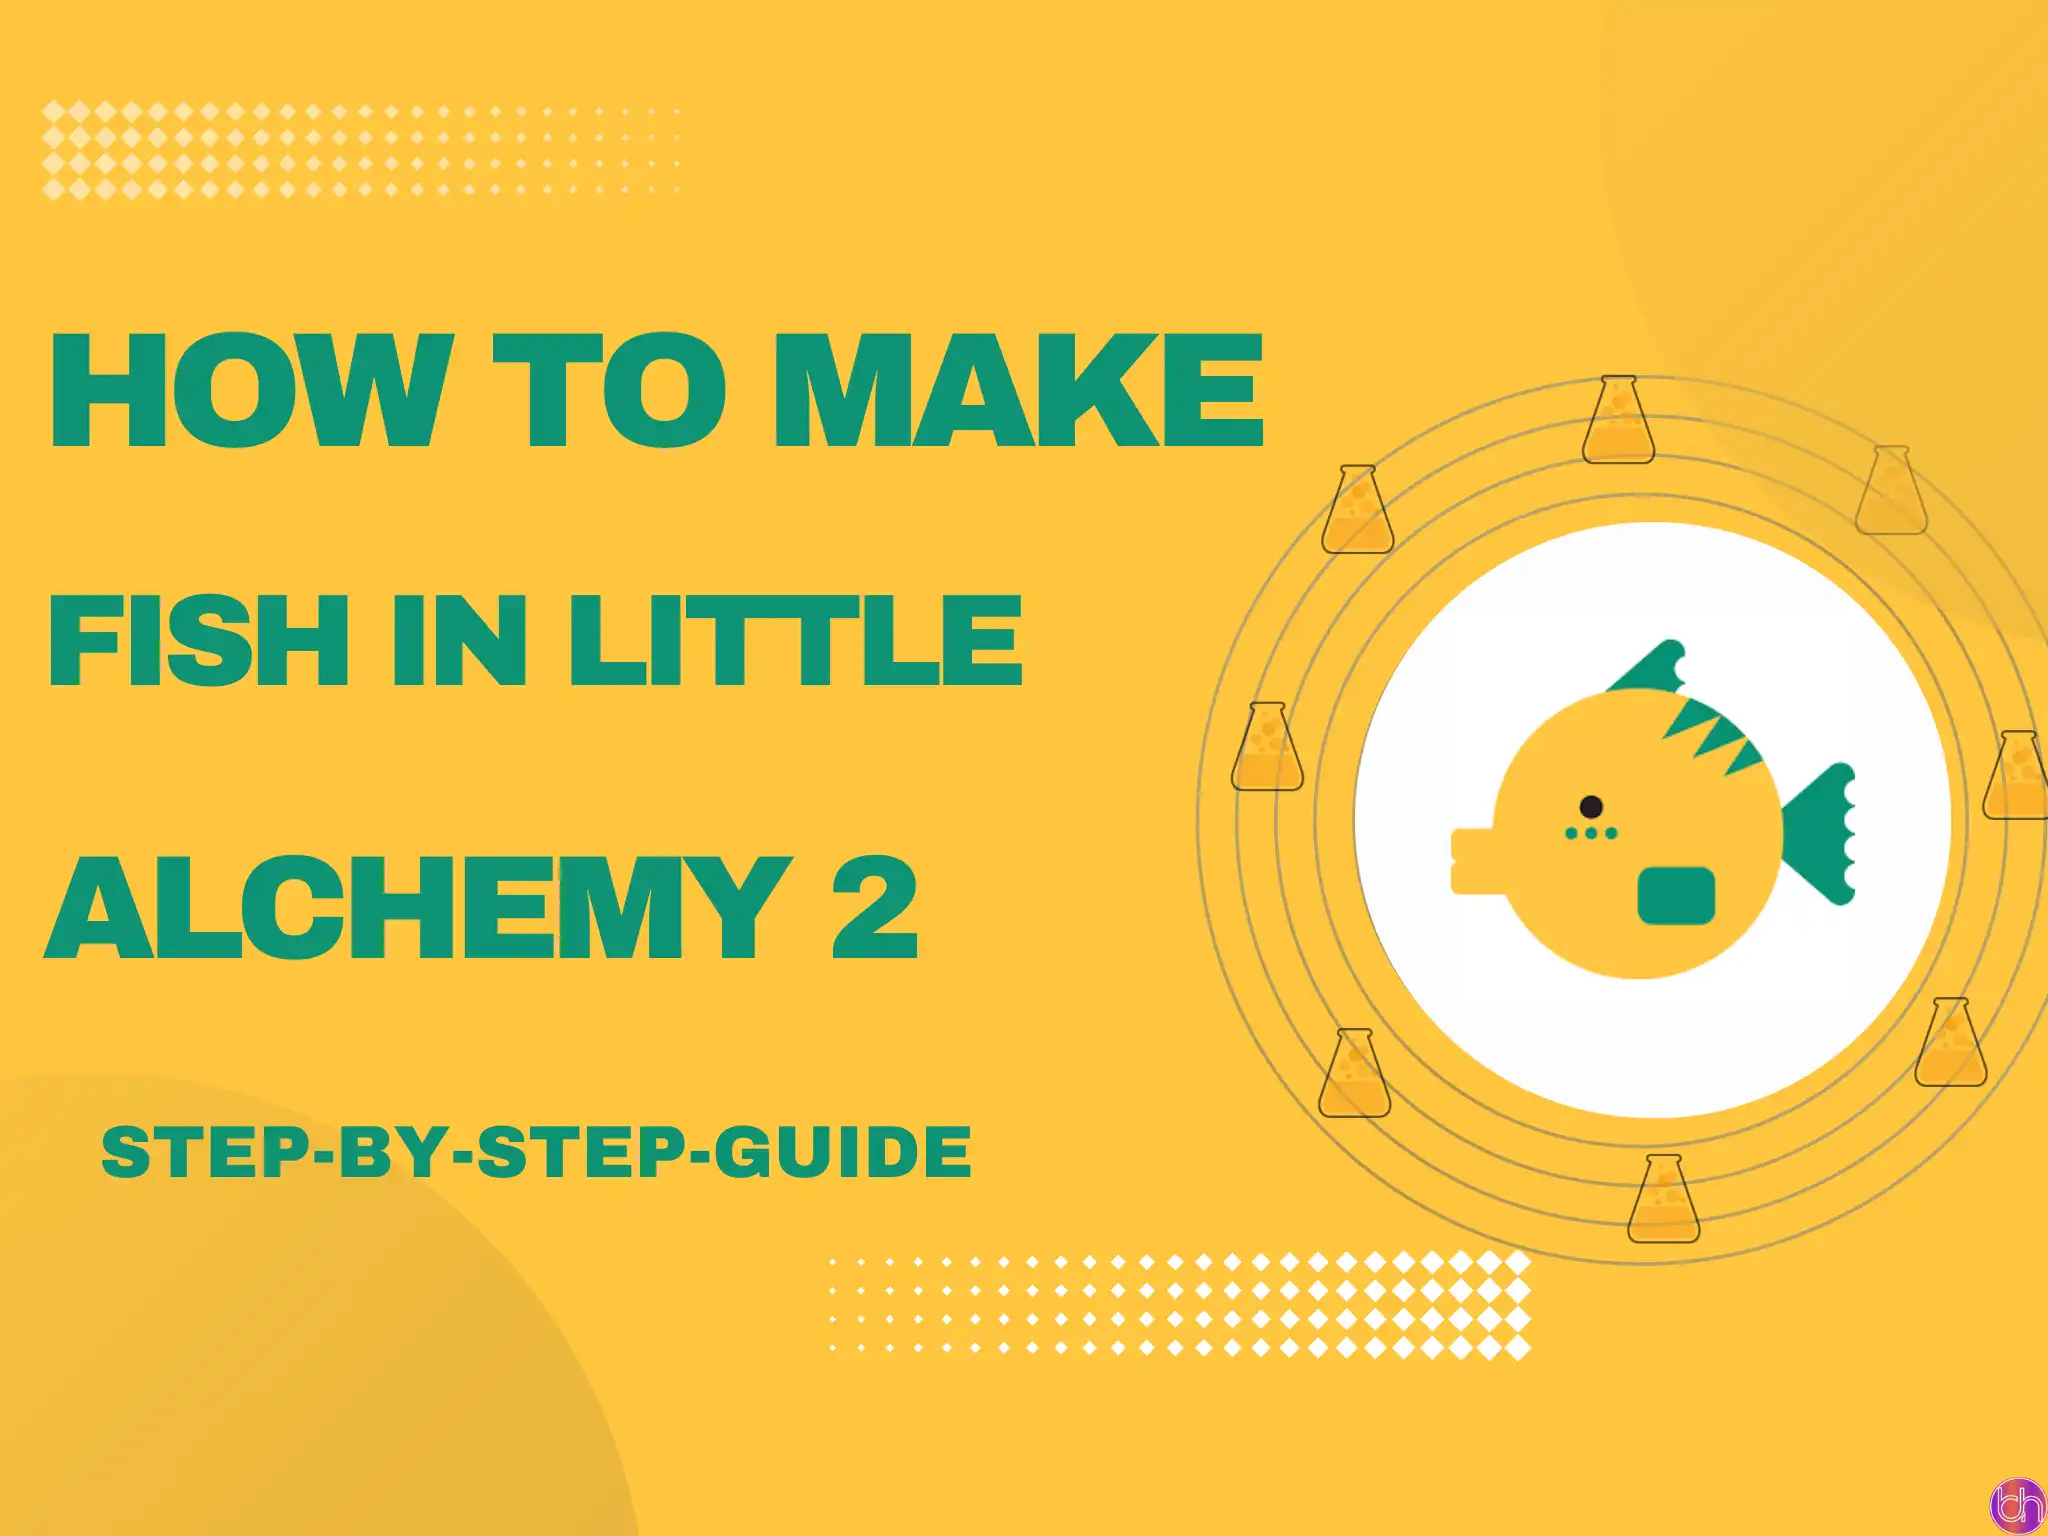 How to make Fish in Little Alchemy 2